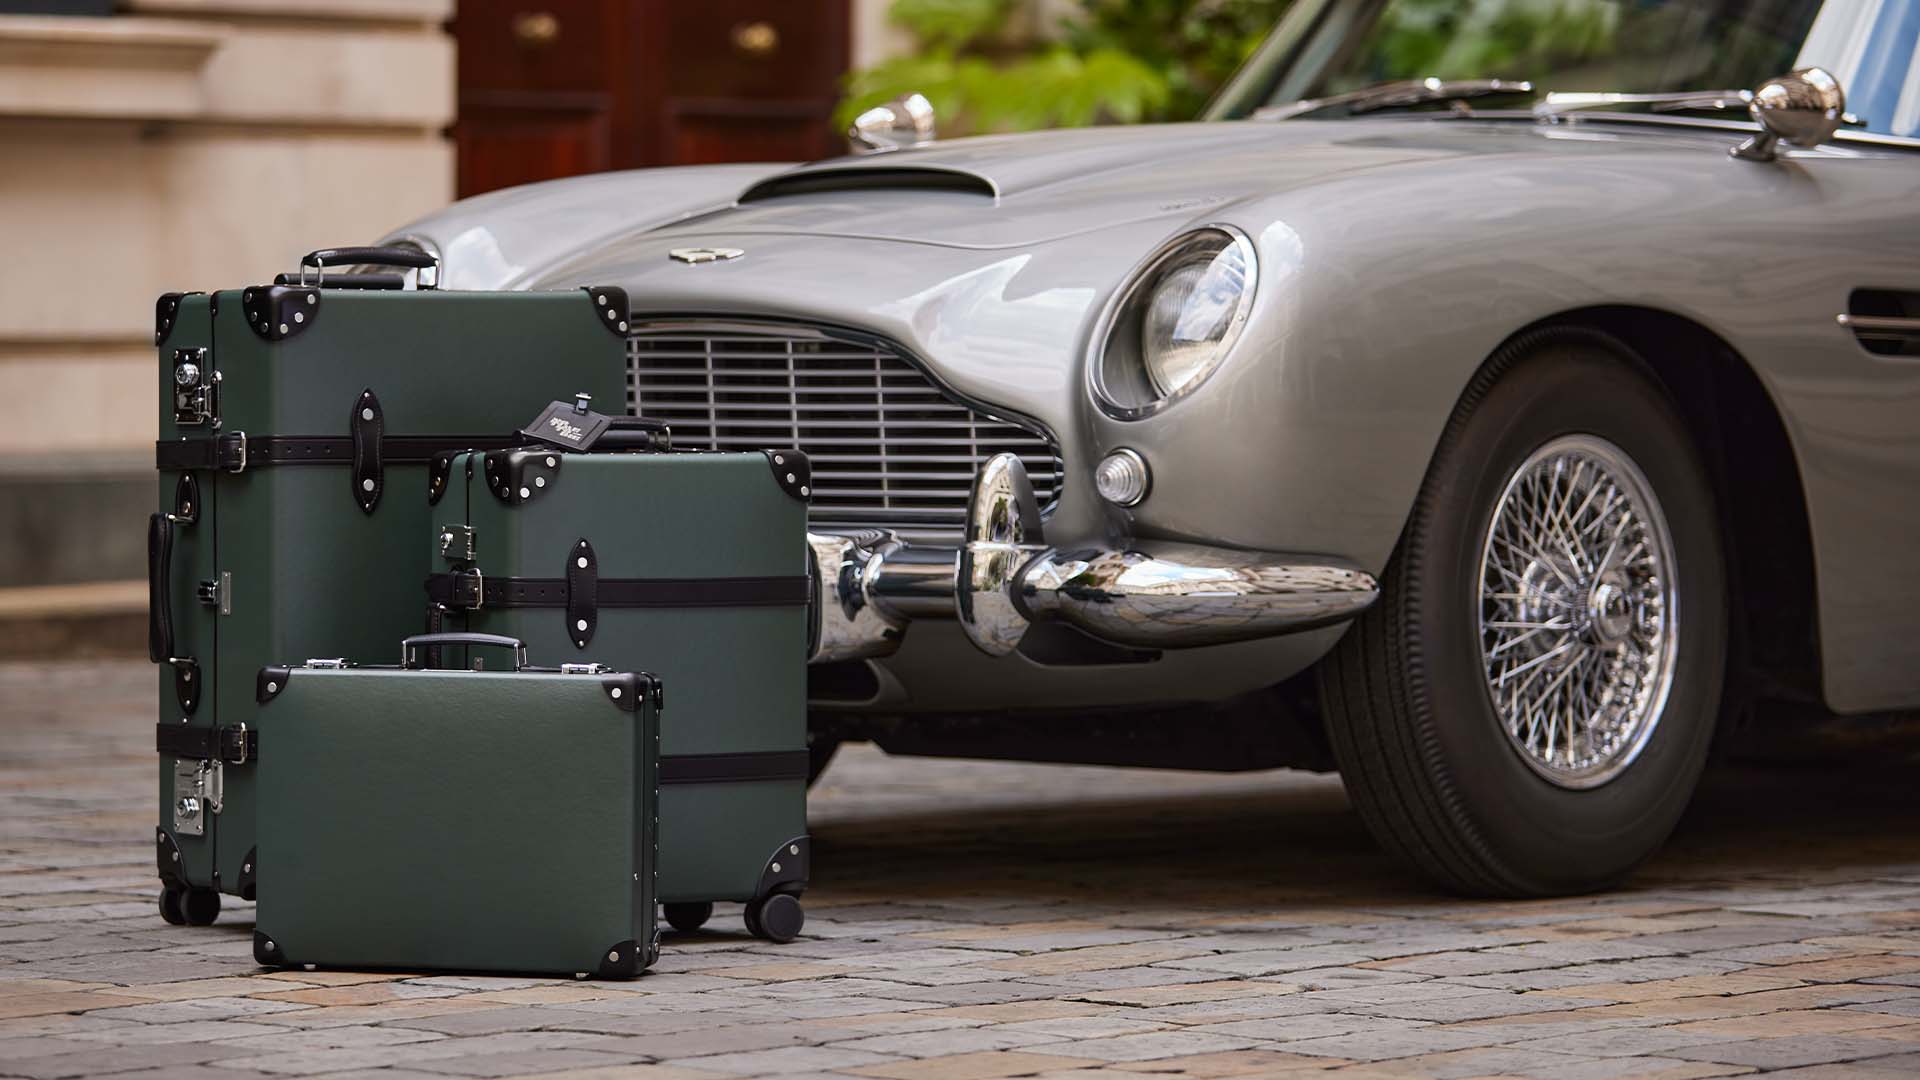 NO TIME TO DIE: The Official Luggage of James Bond - Globe-Trotter Staging